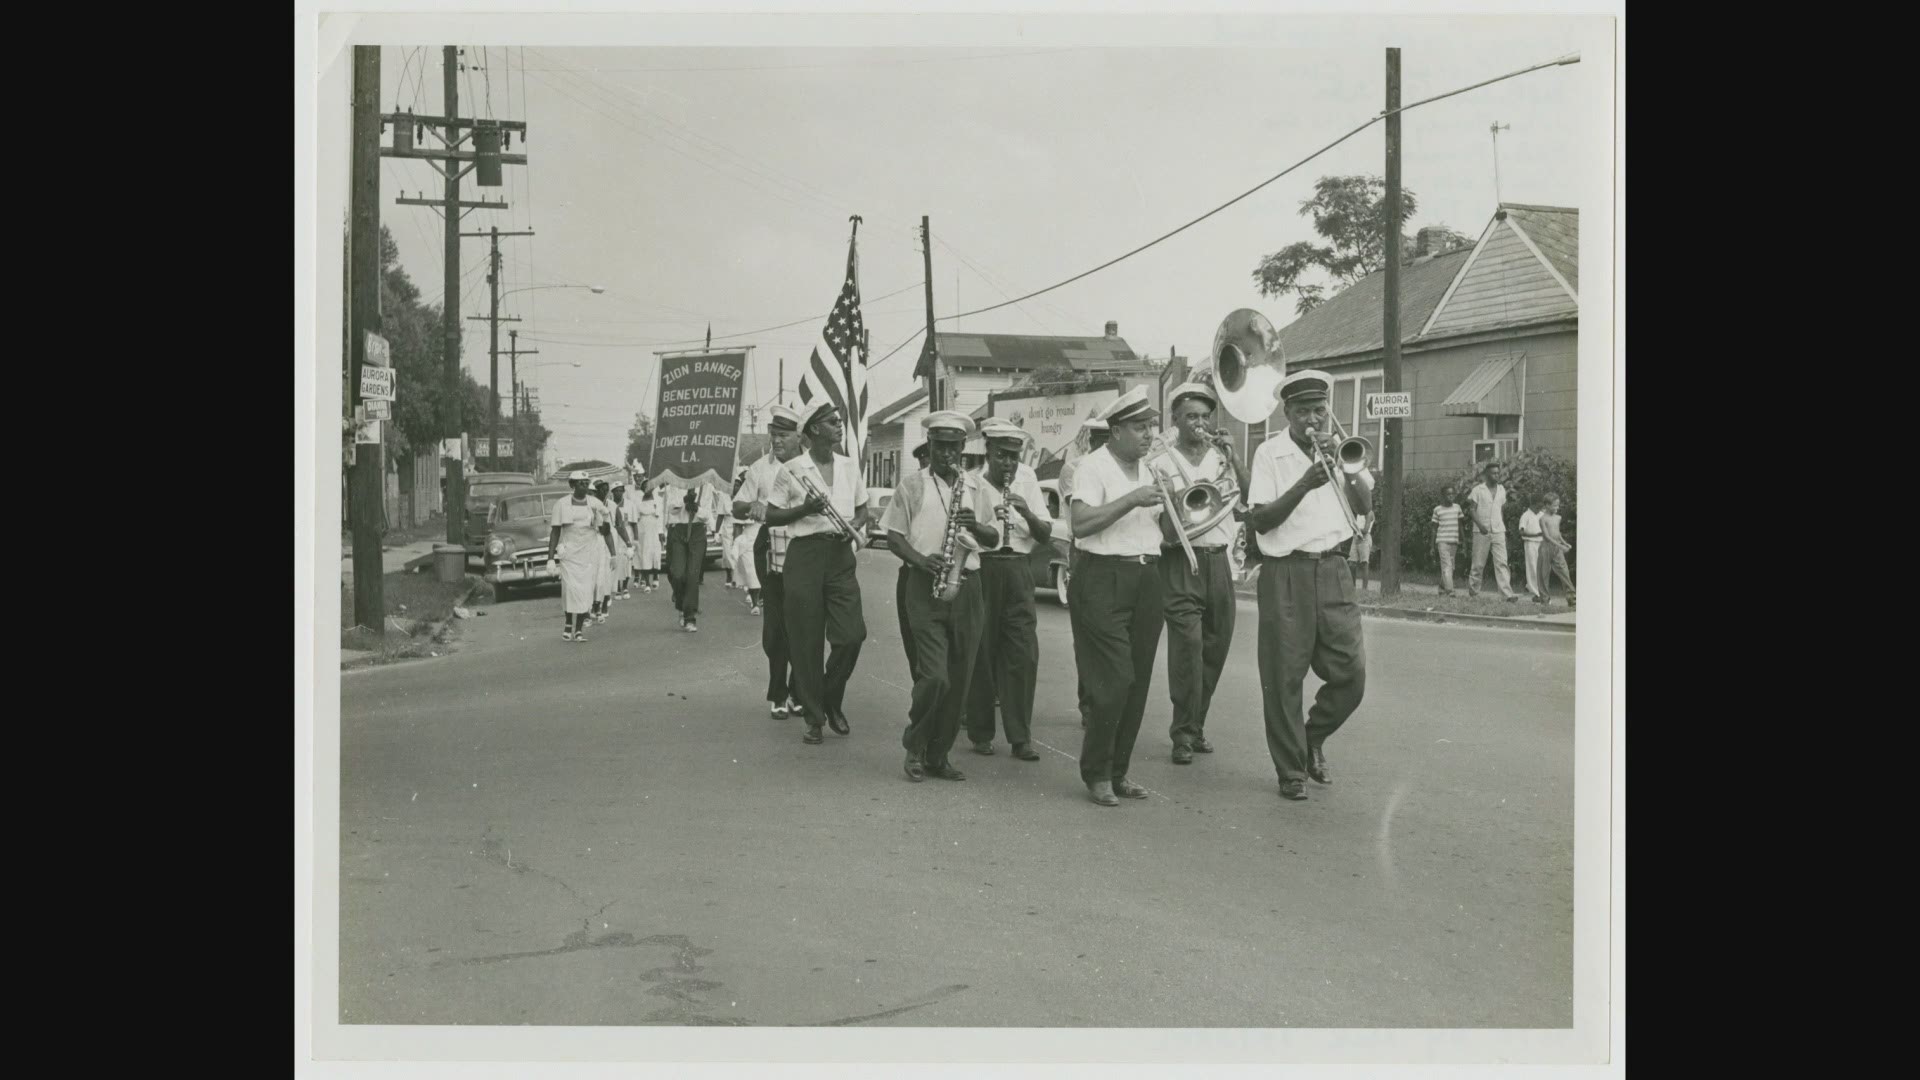 Dancing in the Streets: New exhibit highlights uniquely New Orleans tradition